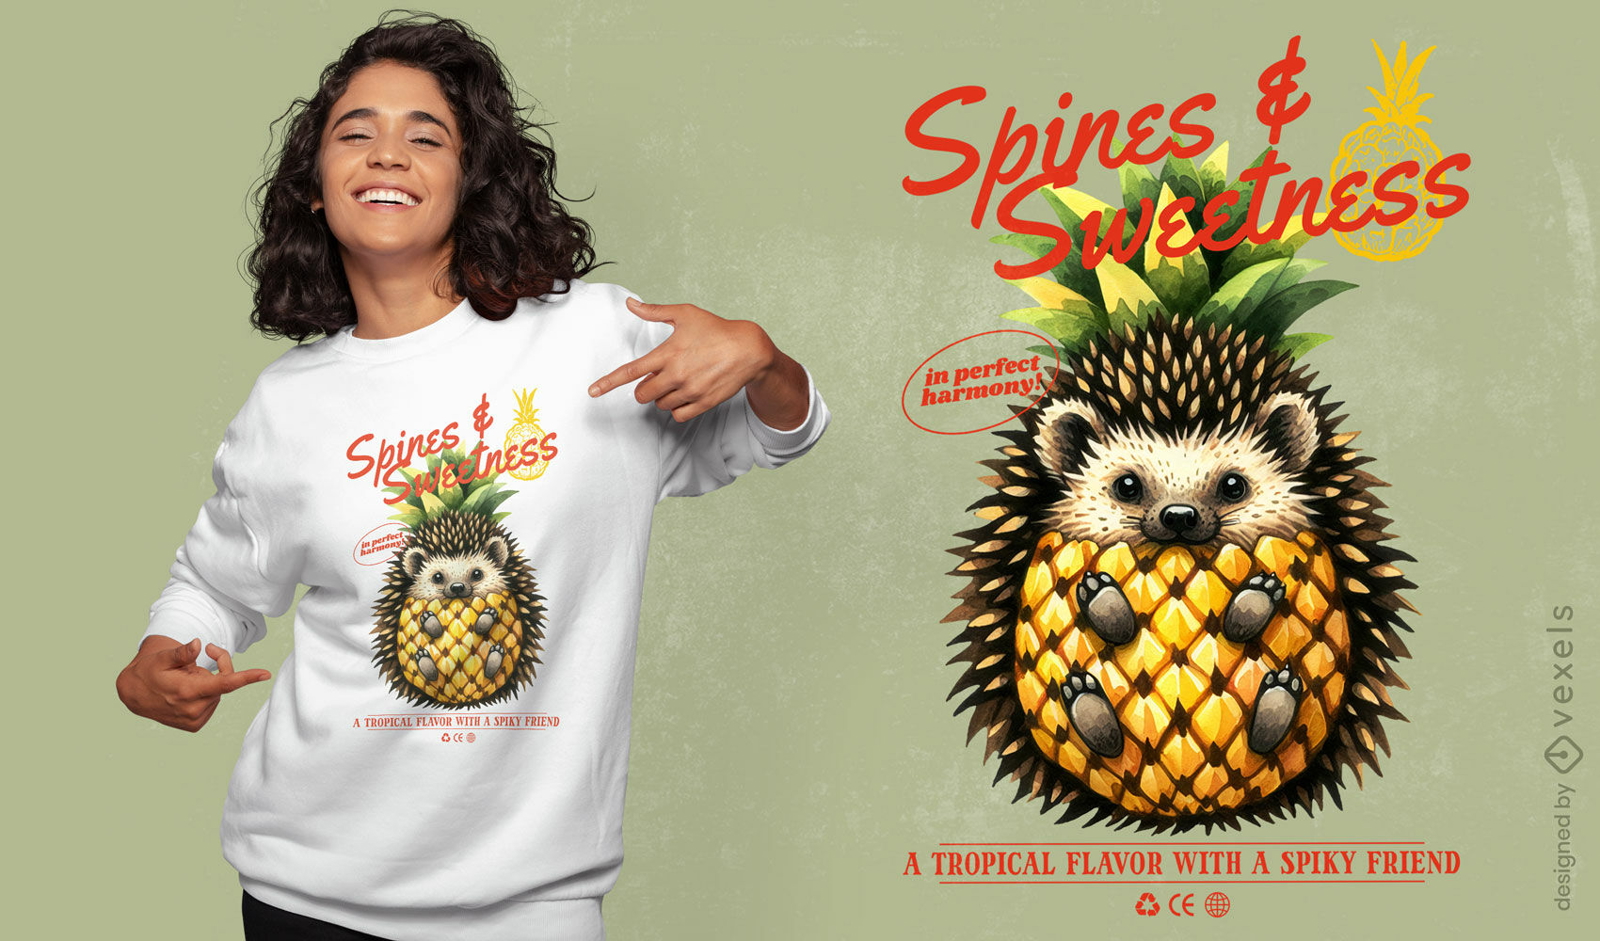 Spines & sweets t-shirt design